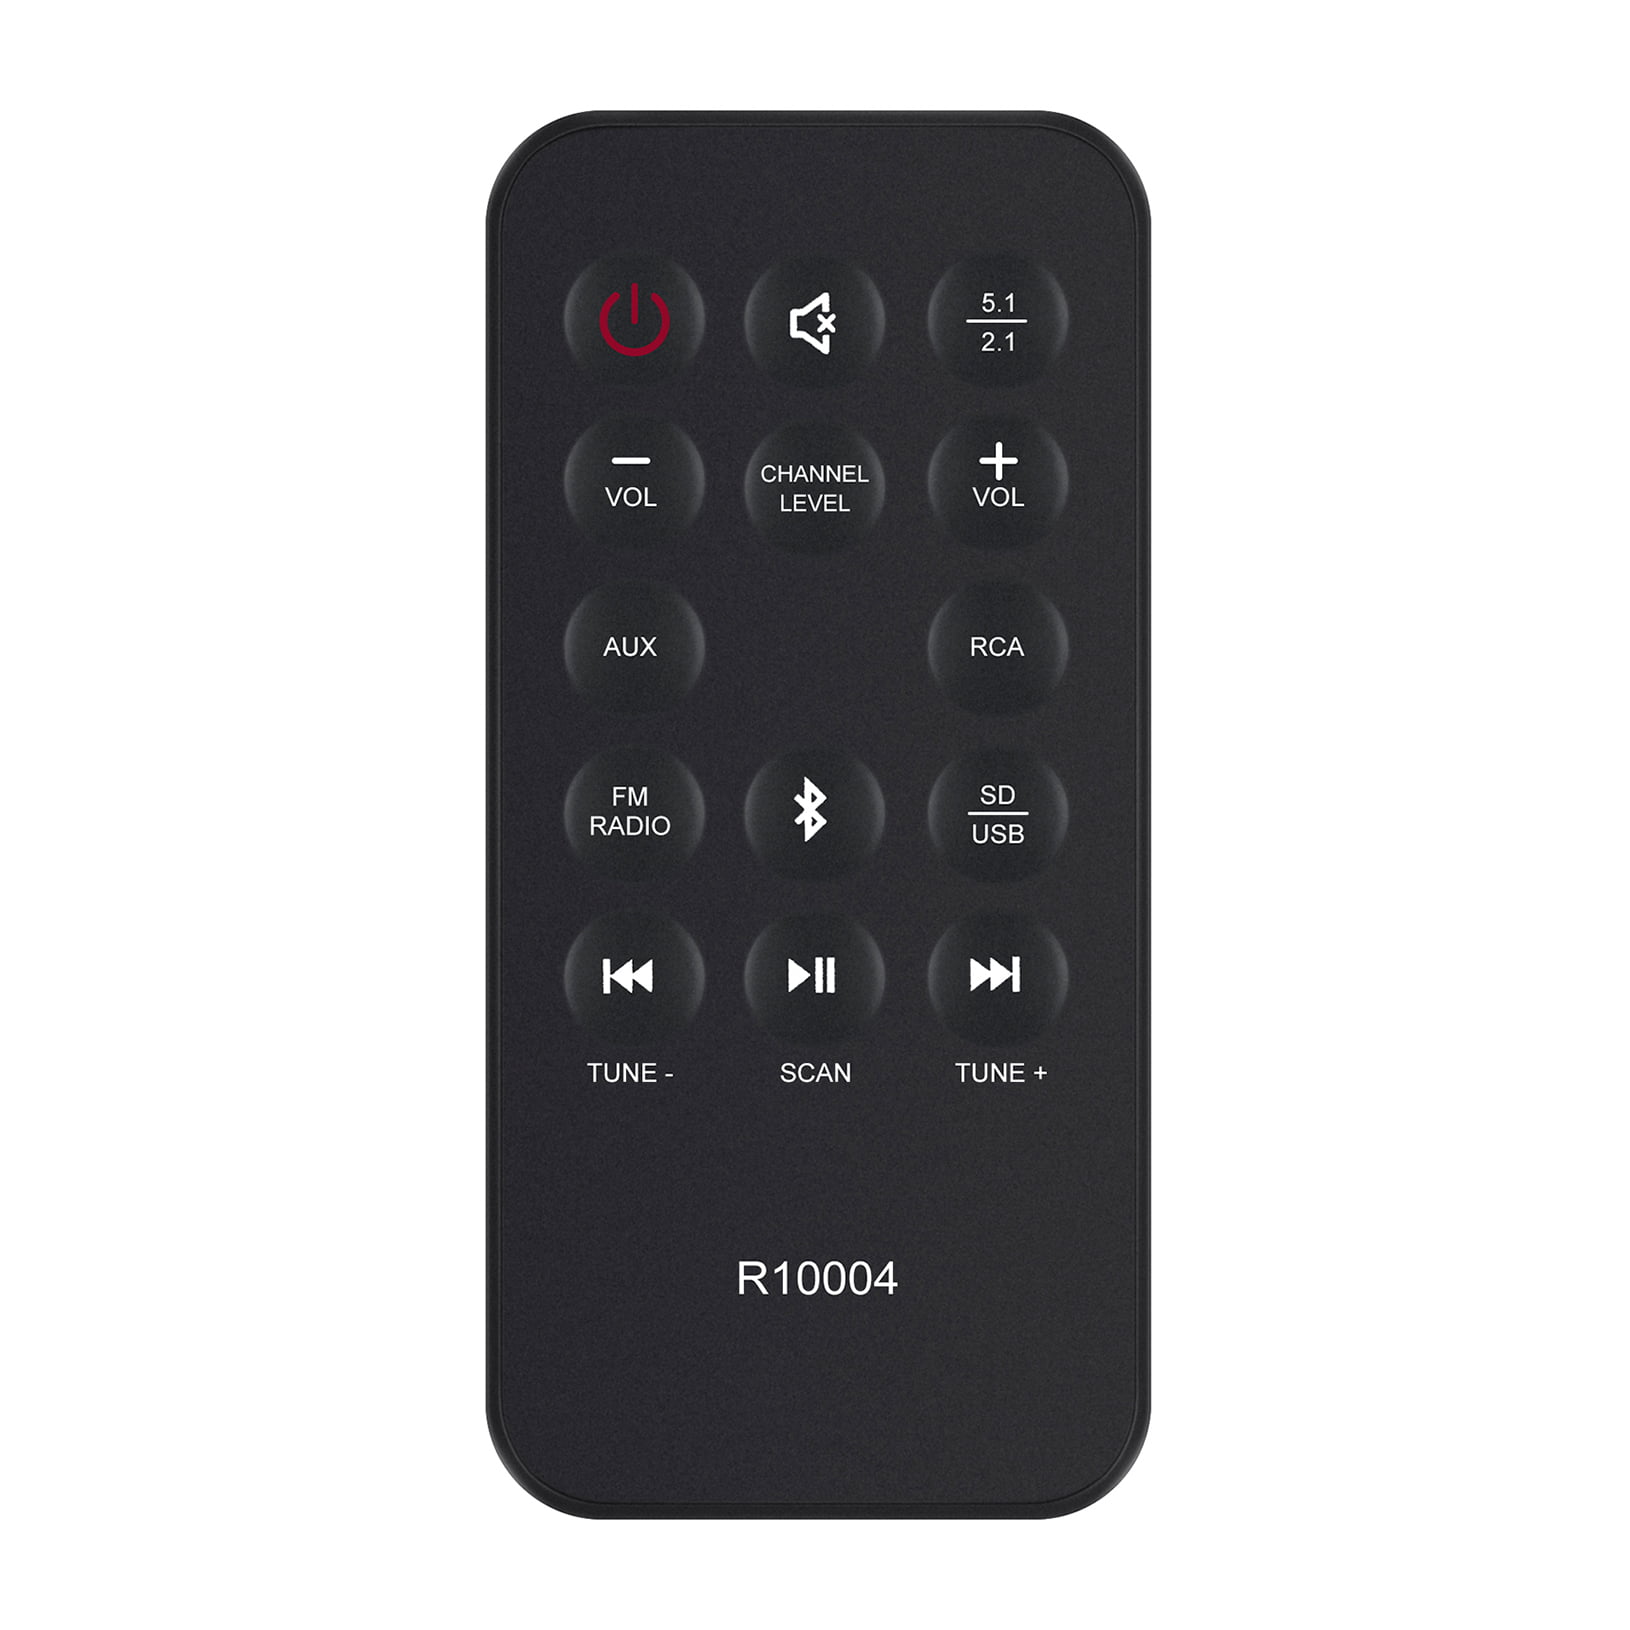 R10004 Replaced Control Fit for Logitech Z607 5.1 Surround Sound Speakers Walmart.com